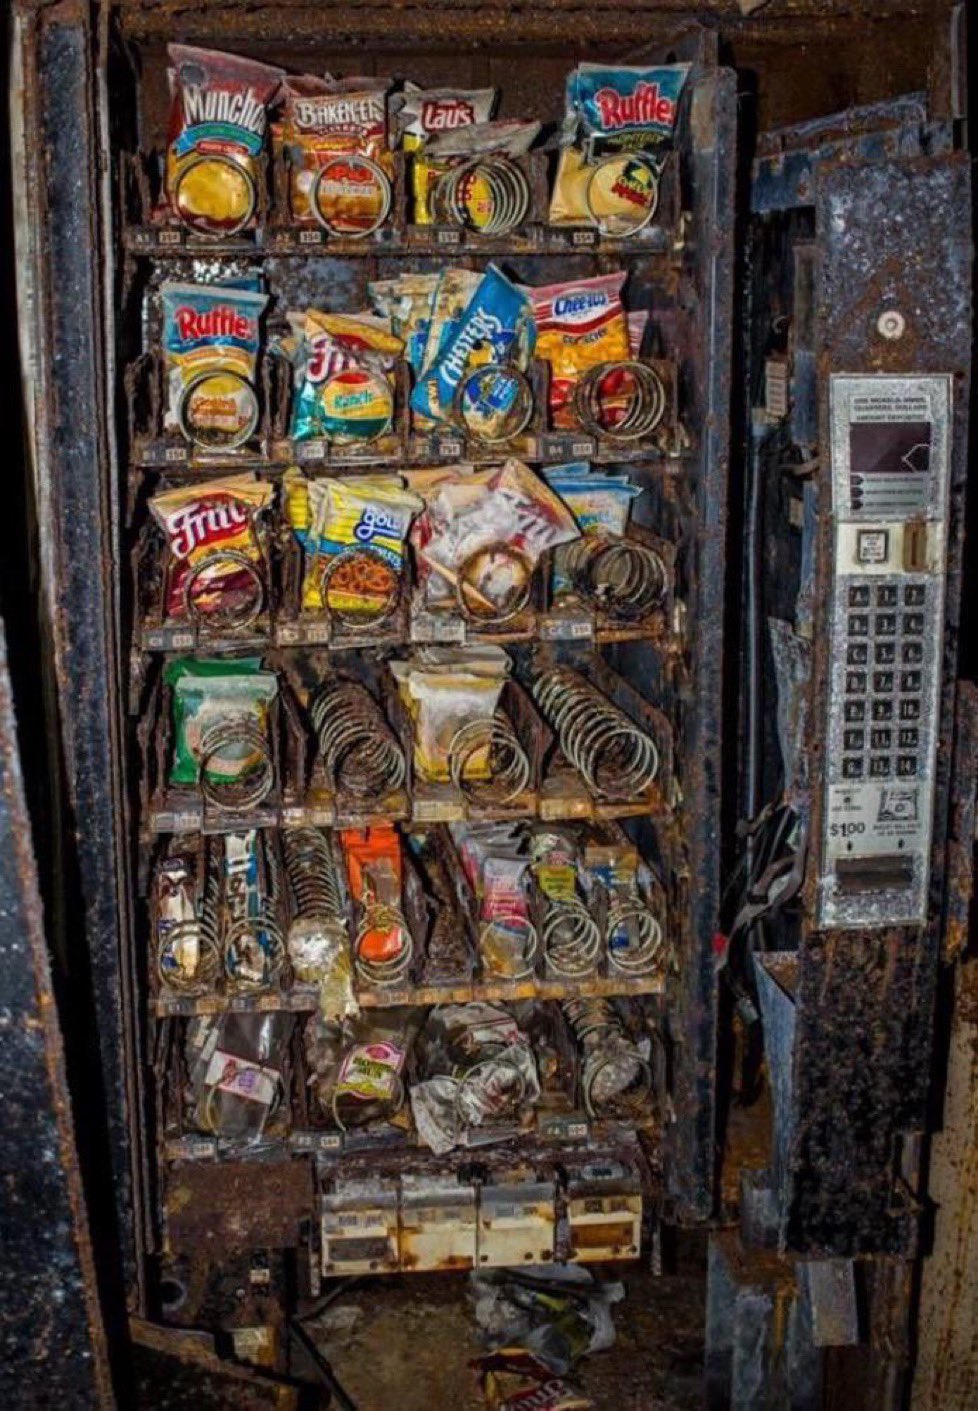 Abandoned Vending Machine From The Late 1980s/ Early 1990s.